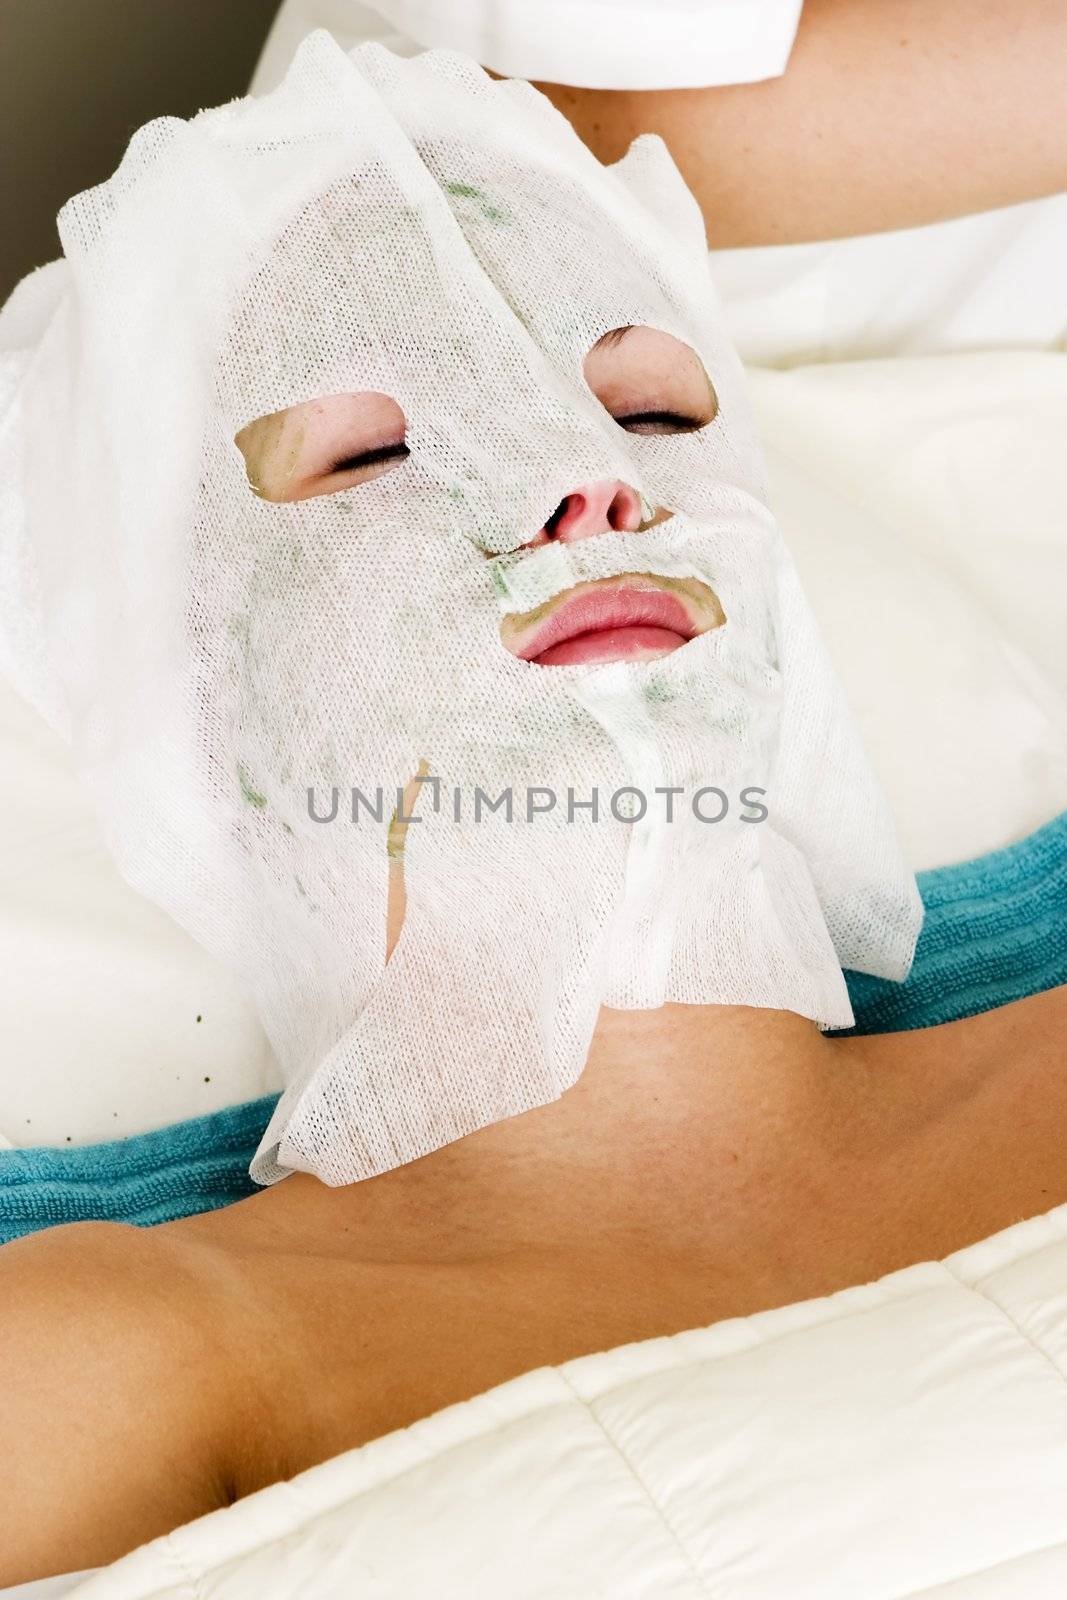 A detail image of a facial mask being applied at a beauty spa.